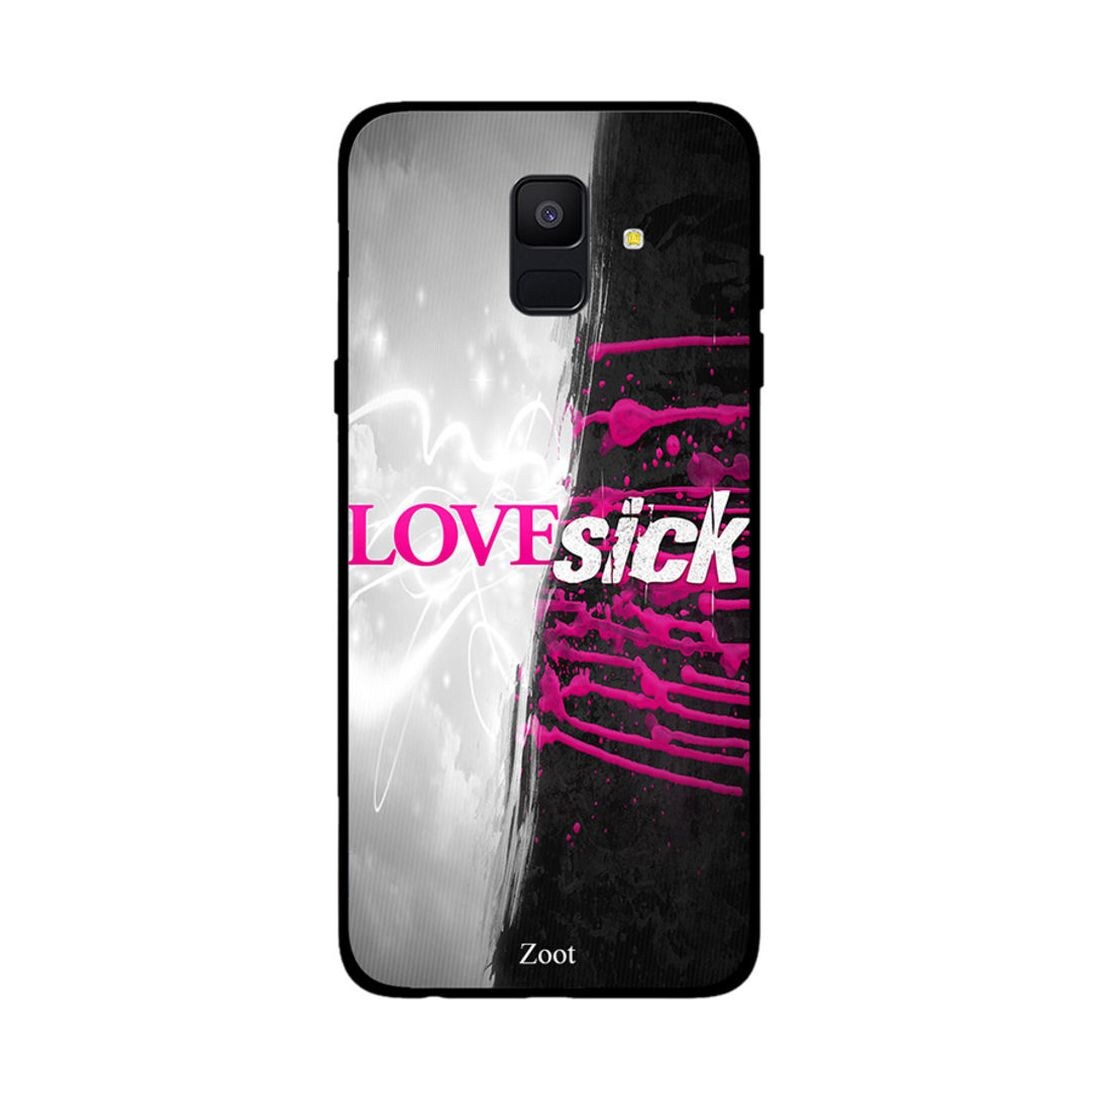 Thermoplastic Polyurethane Protective Case Cover For Samsung Galaxy A6 Love Sick